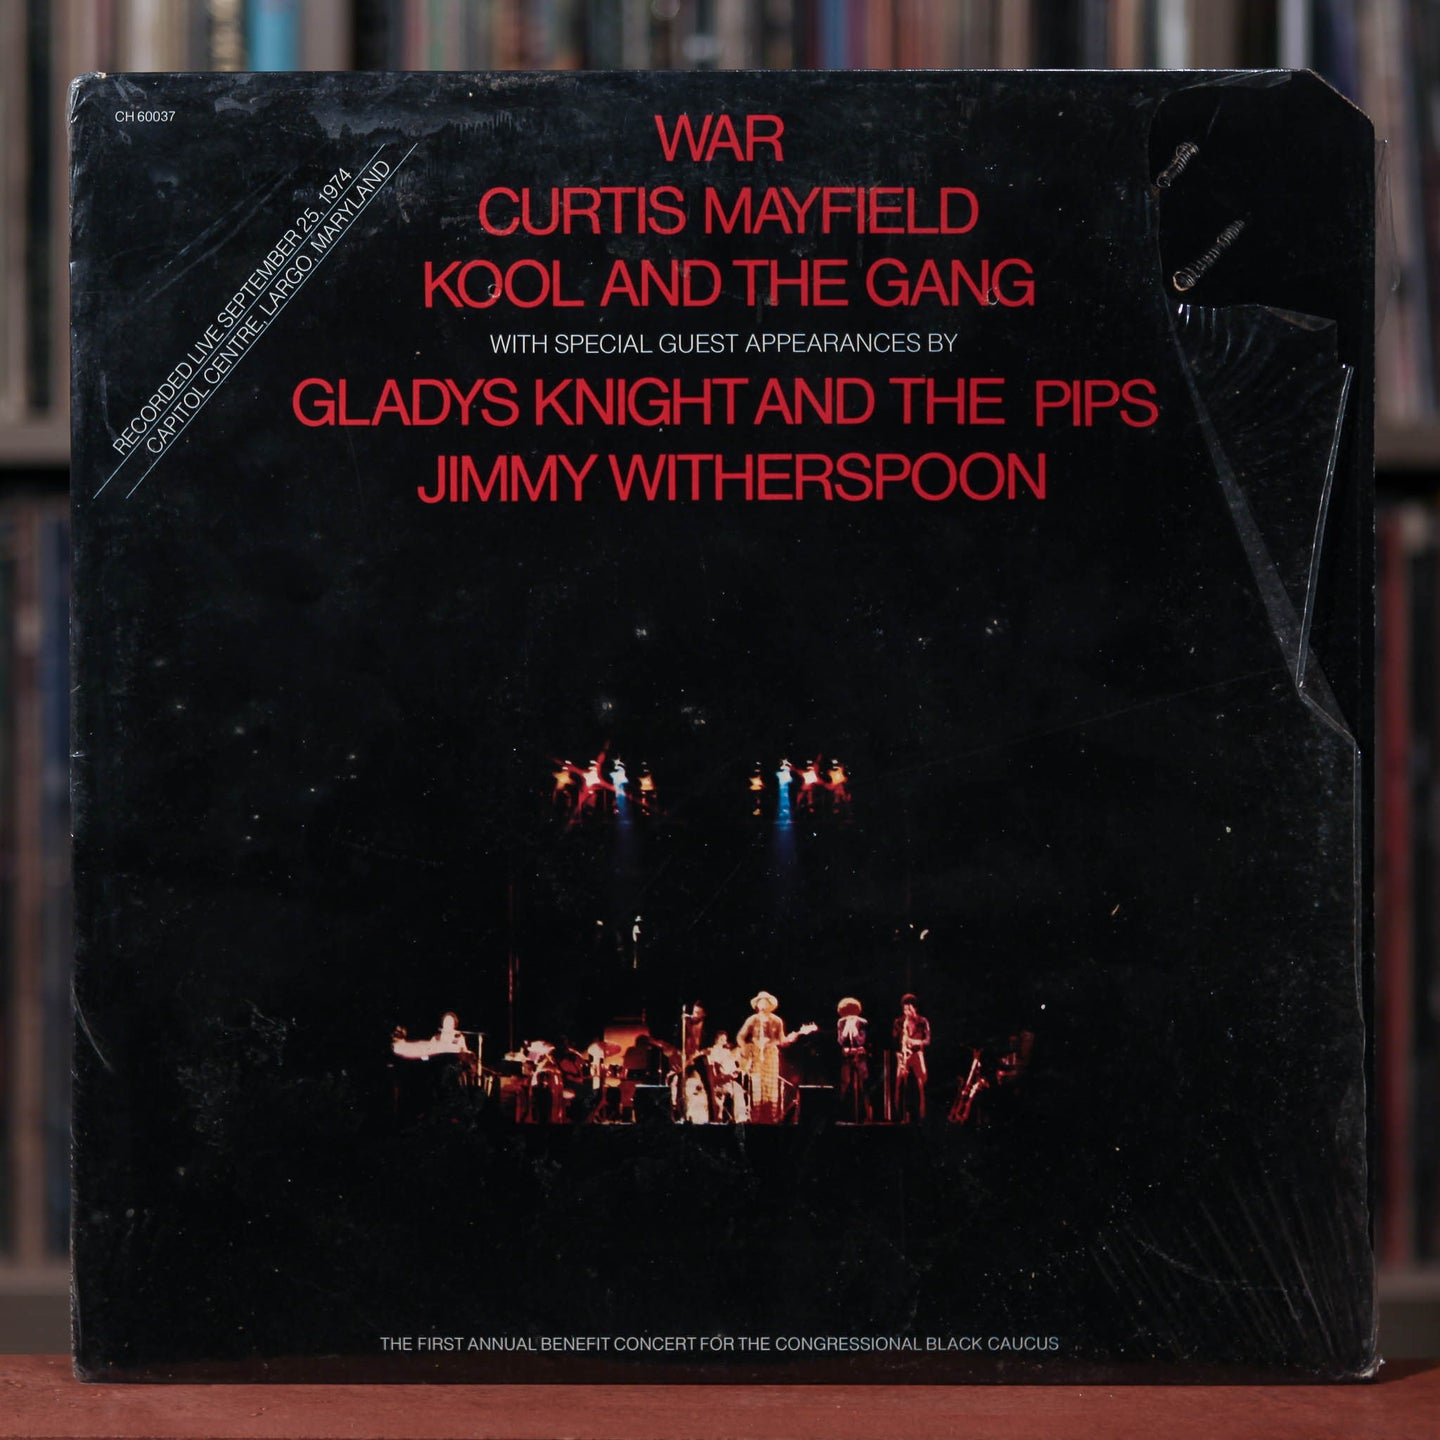 War / Curtis Mayfield / Kool And The Gang* / Gladys Knight And The Pips / Jimmy Witherspoon - The First Annual Benefit Concert For The Congressional Black Caucus - 1975 Chess, VG+/VG+